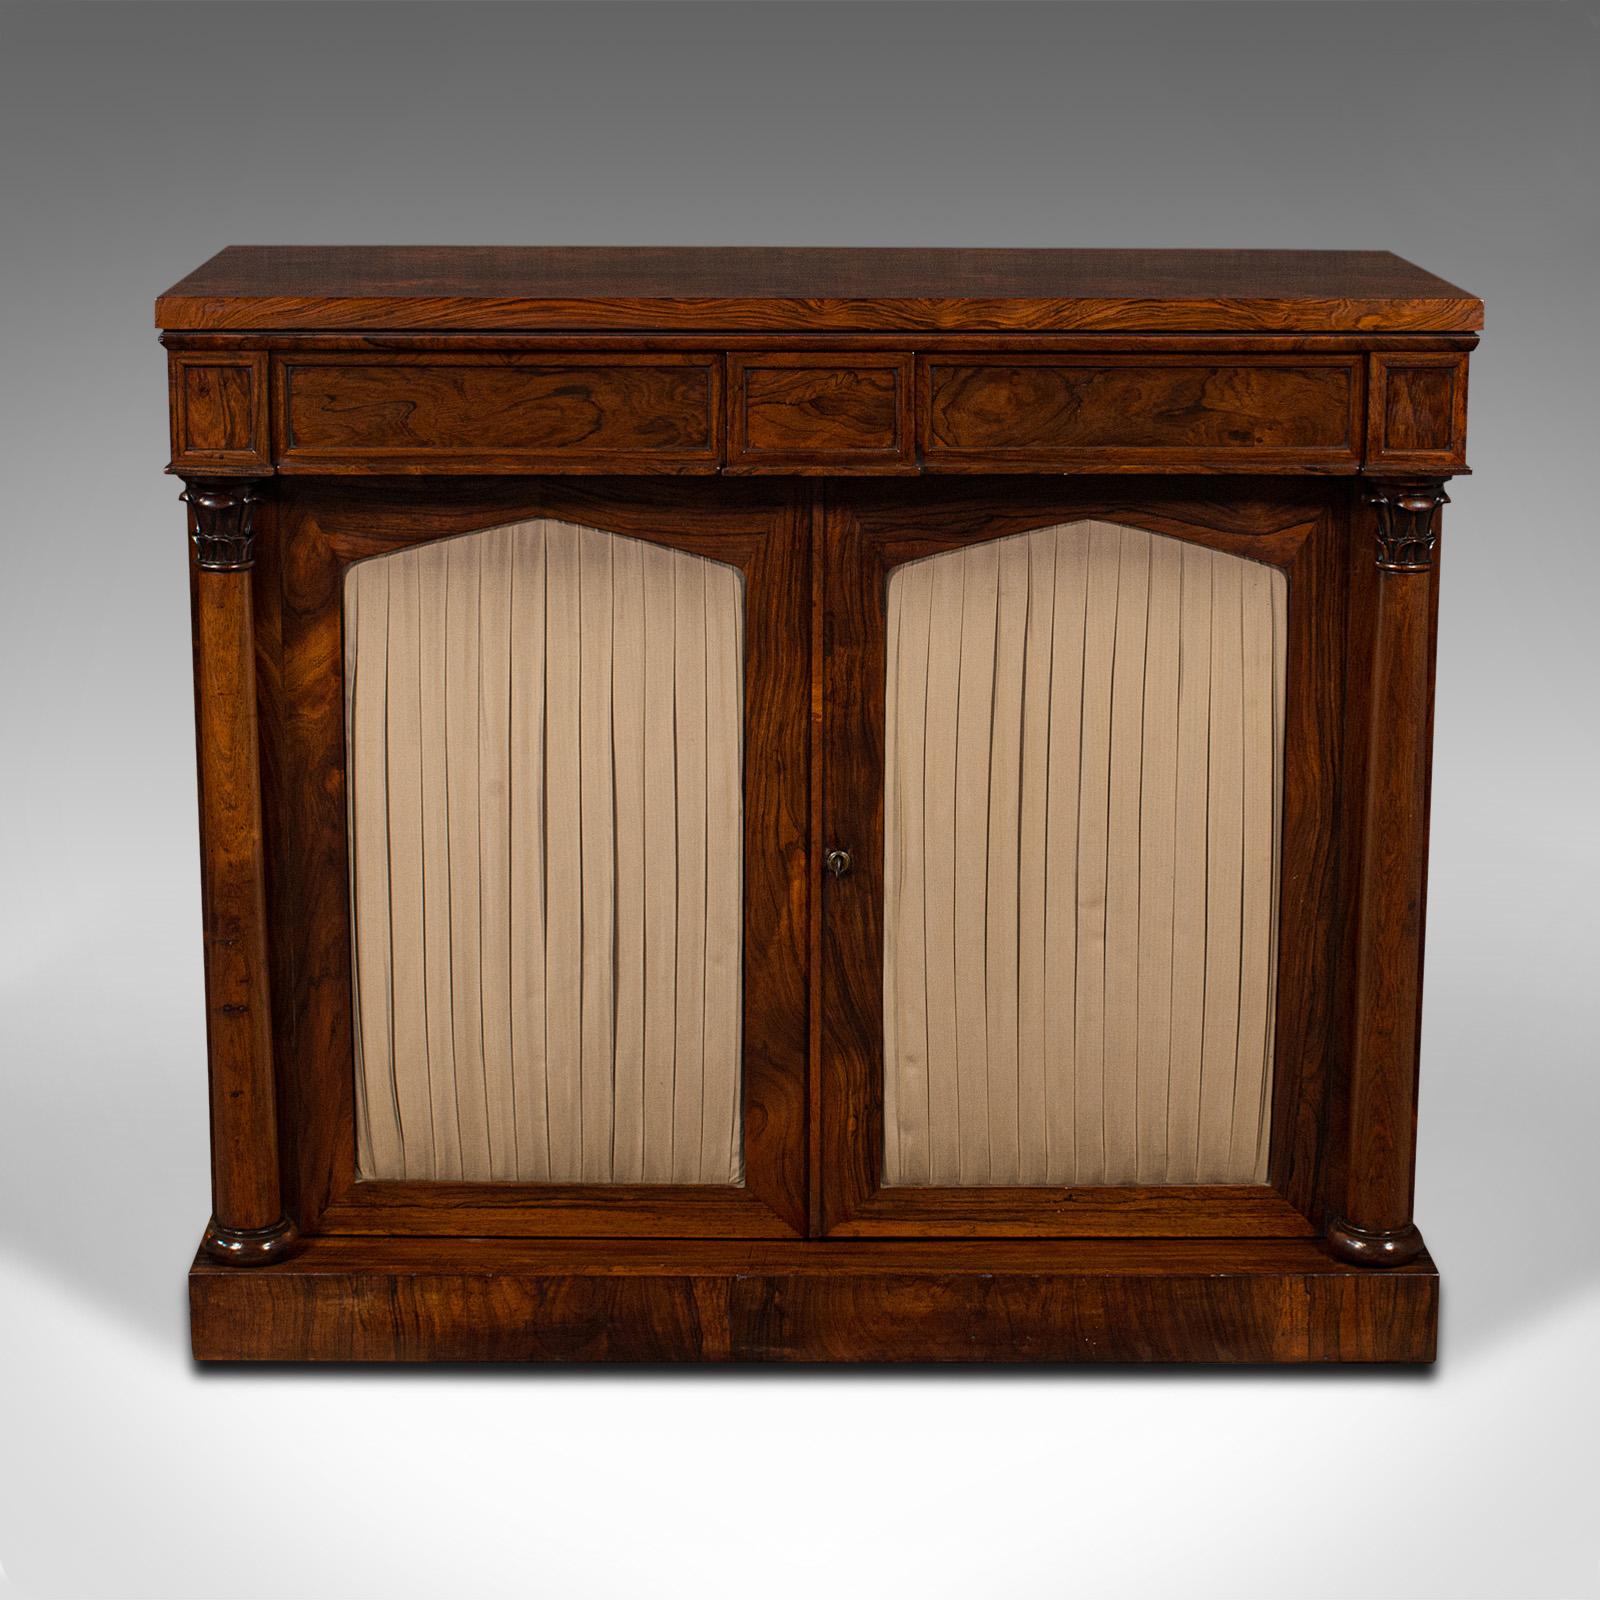 This is an antique breakfront book cabinet. An English, rosewood chiffonier or sideboard, dating to the William IV period period, circa 1830.

Superb William IV craftsmanship with striking grain and colour
Displays a desirable aged patina and in